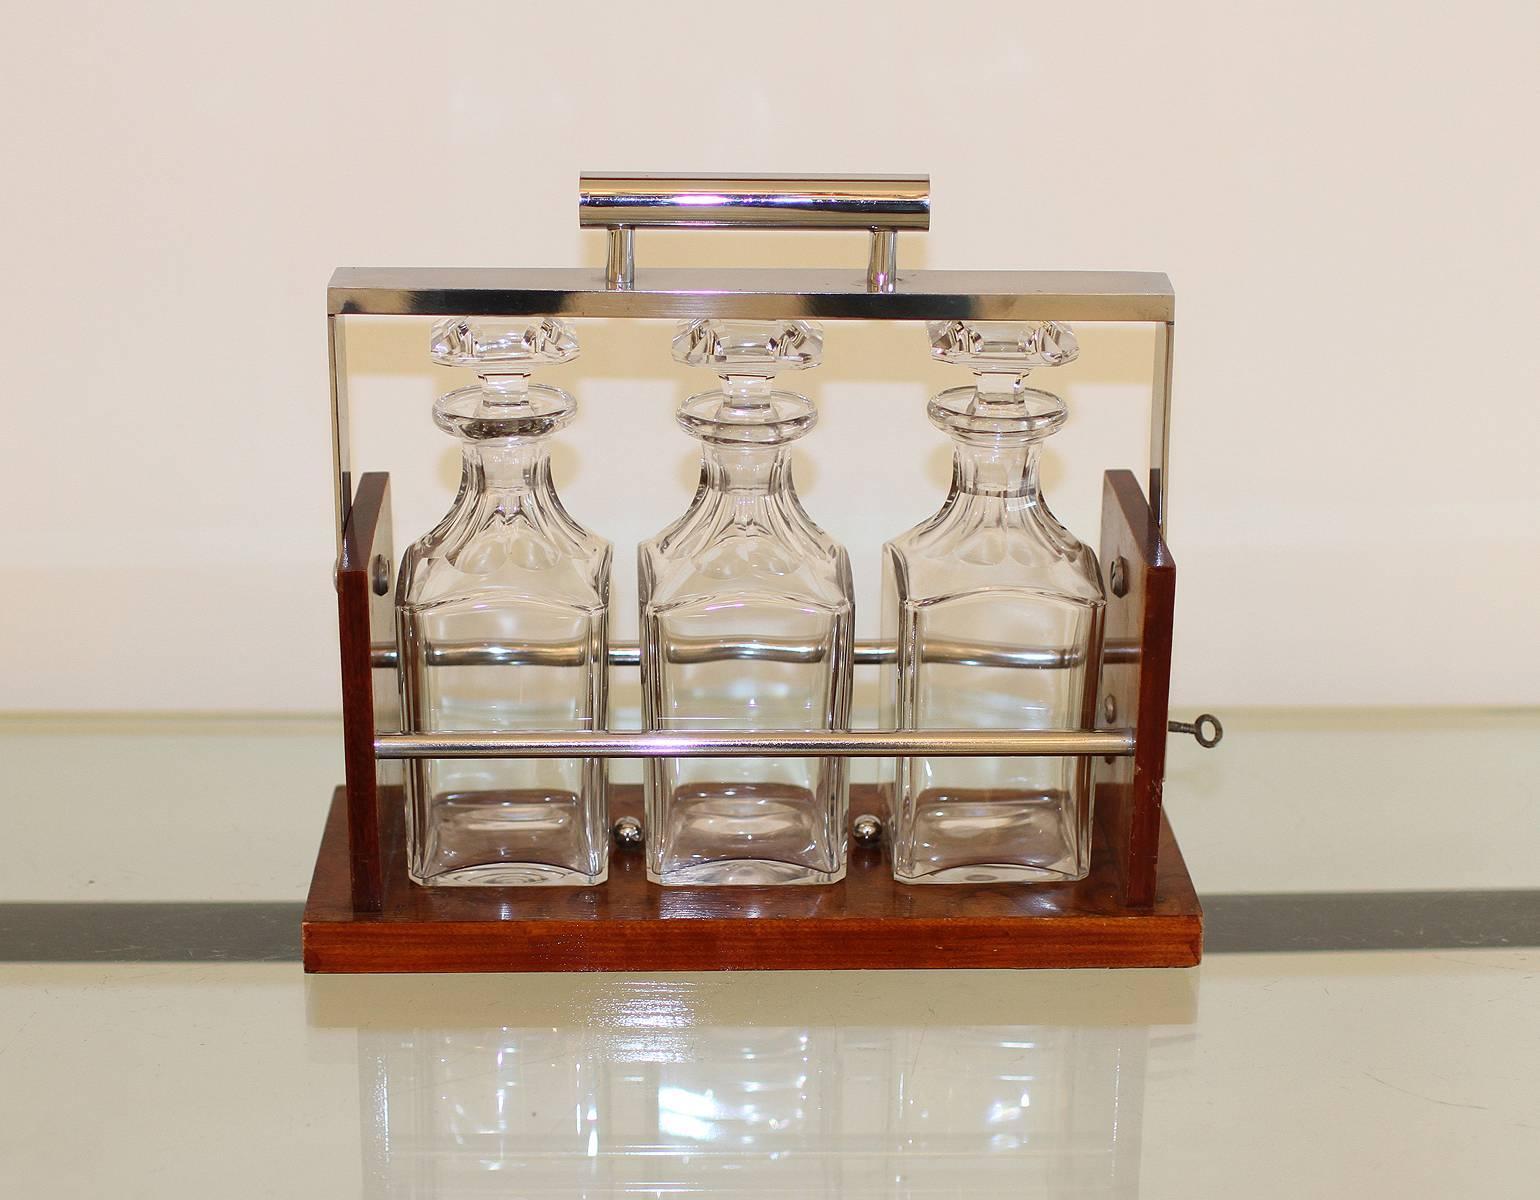 Chrome French Art Deco Tantalus Decanter Set Attributed to ADNET, 1930